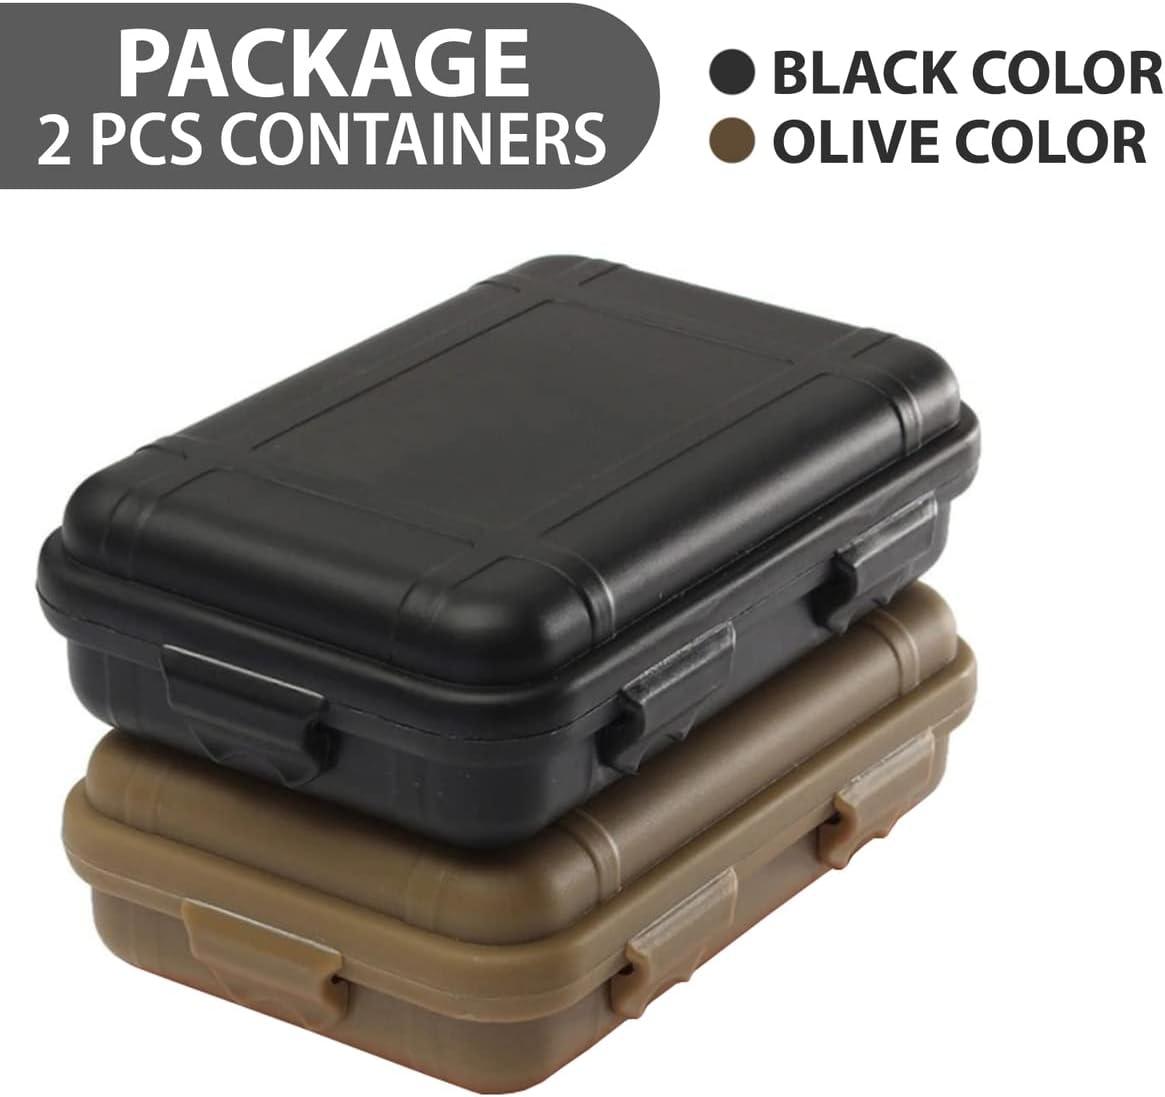 Waterproof Storage Box With Foam Lining For Phone, Electronic Camera  Gadgets, And Survival Gear Airtight Outdoor Case Container From Lybdehome,  $15.36